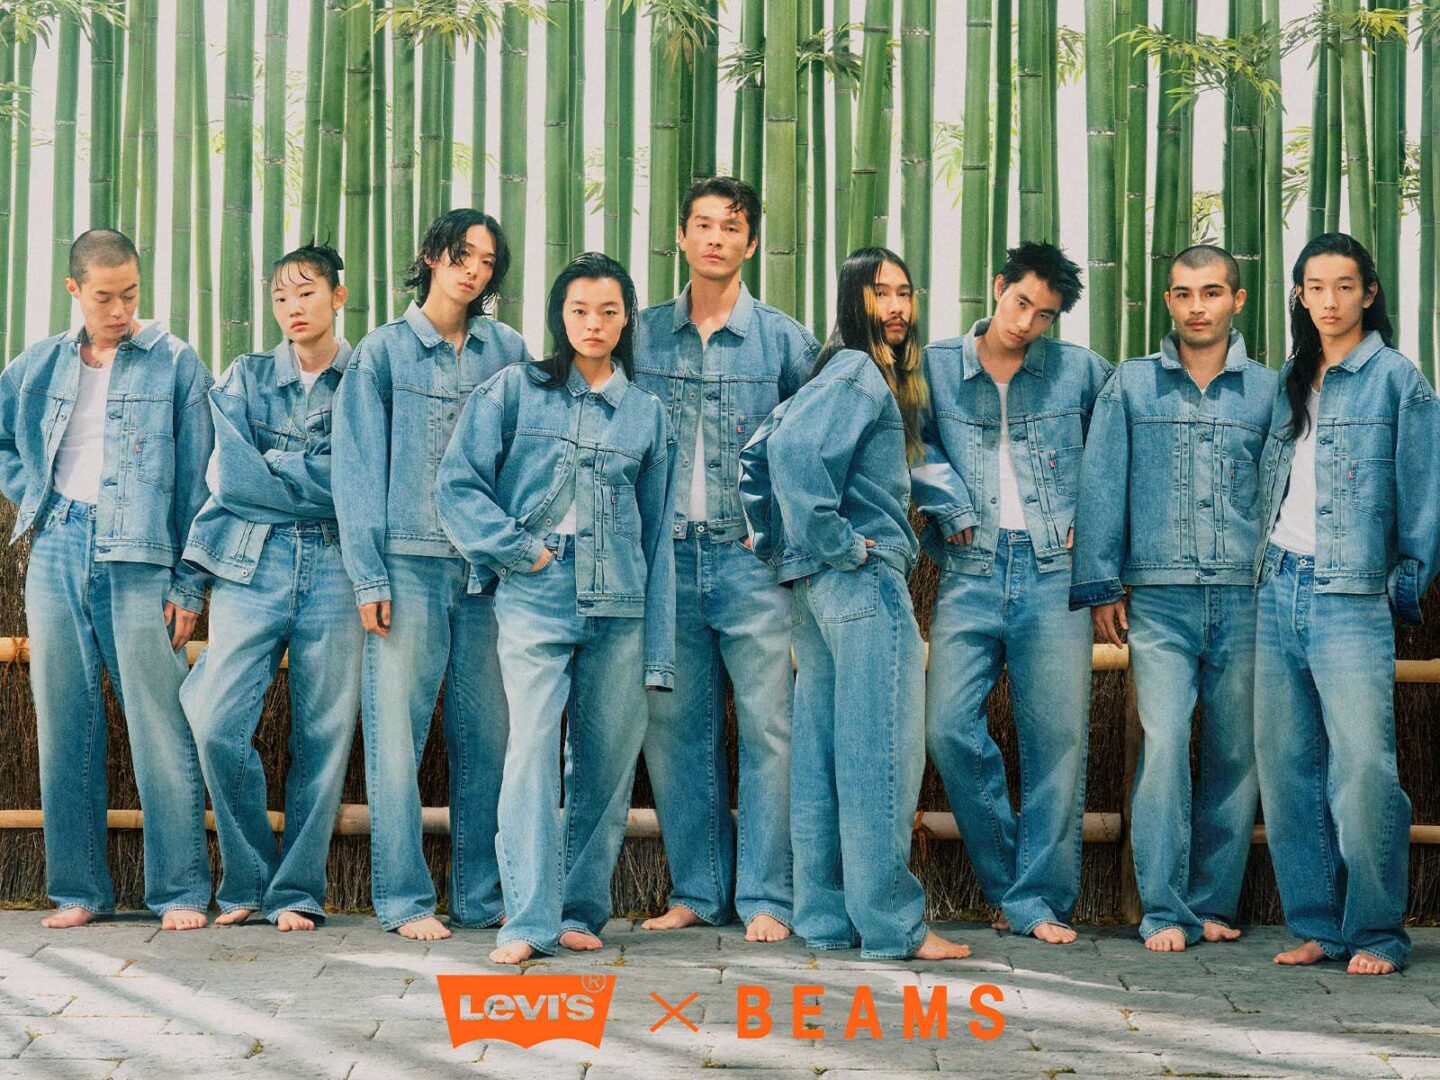 Levi’s® and BEAMS launch fourth capsule collaboration